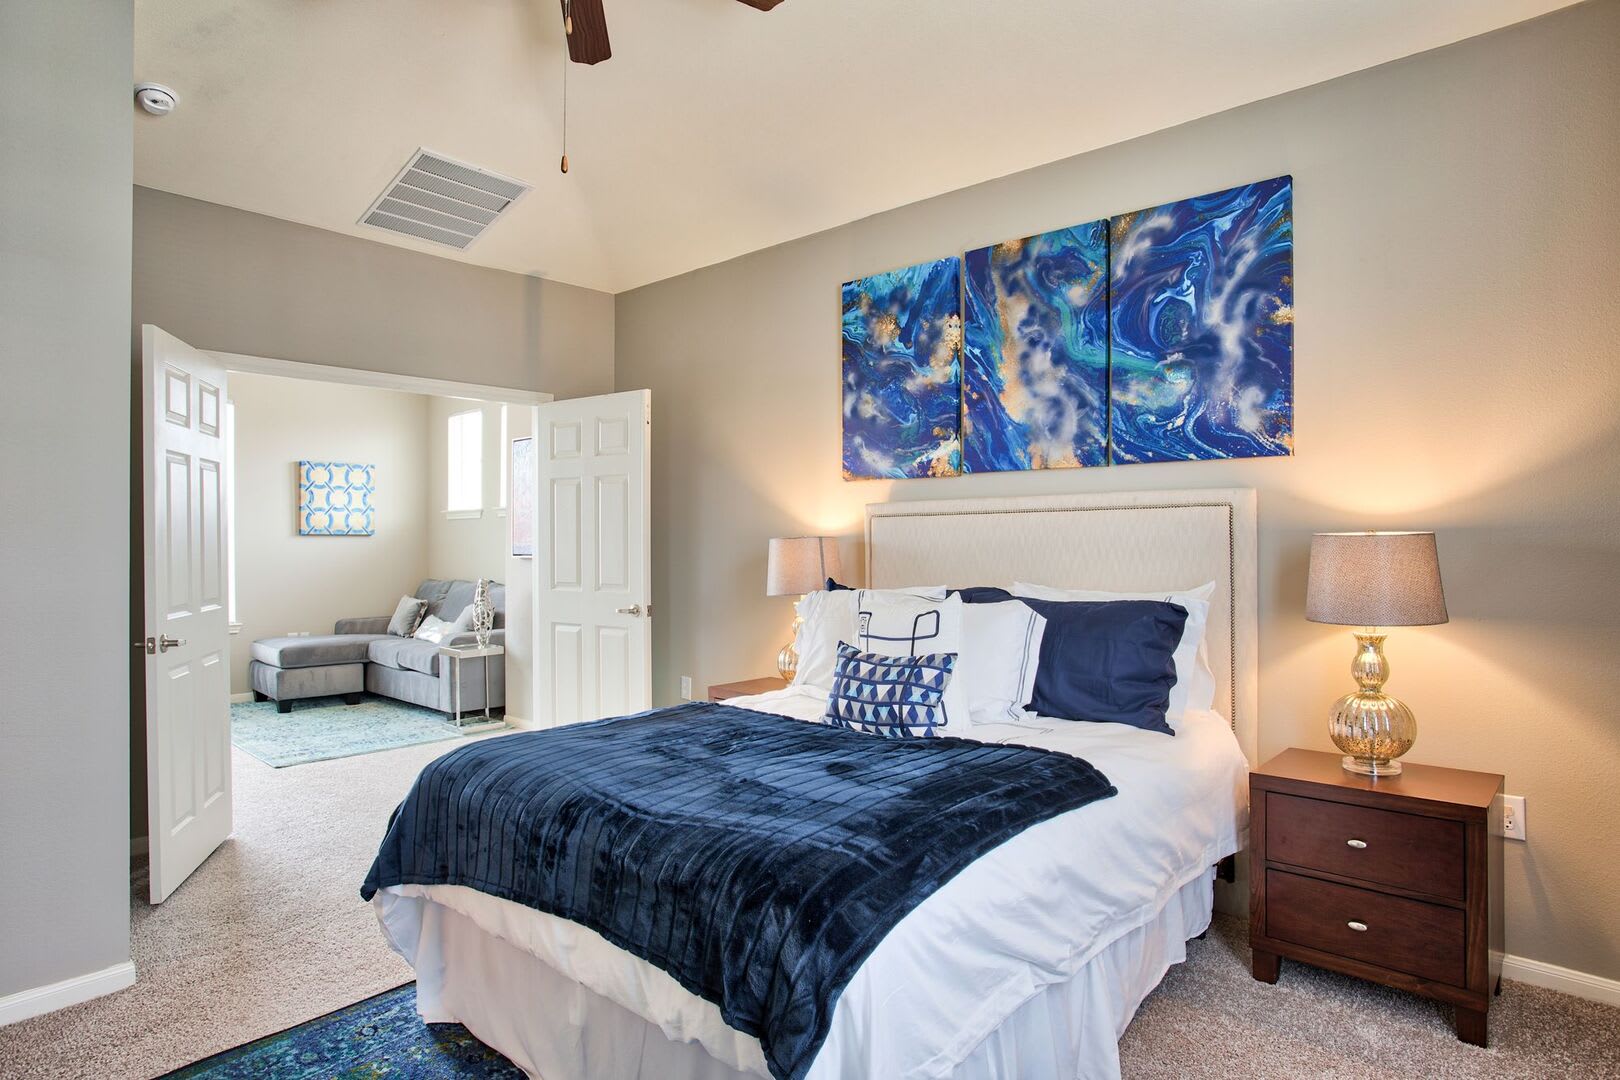 Retro-modern furniture and classic decor in a model home's bedroom at Parkside Towns in Richardson, Texas